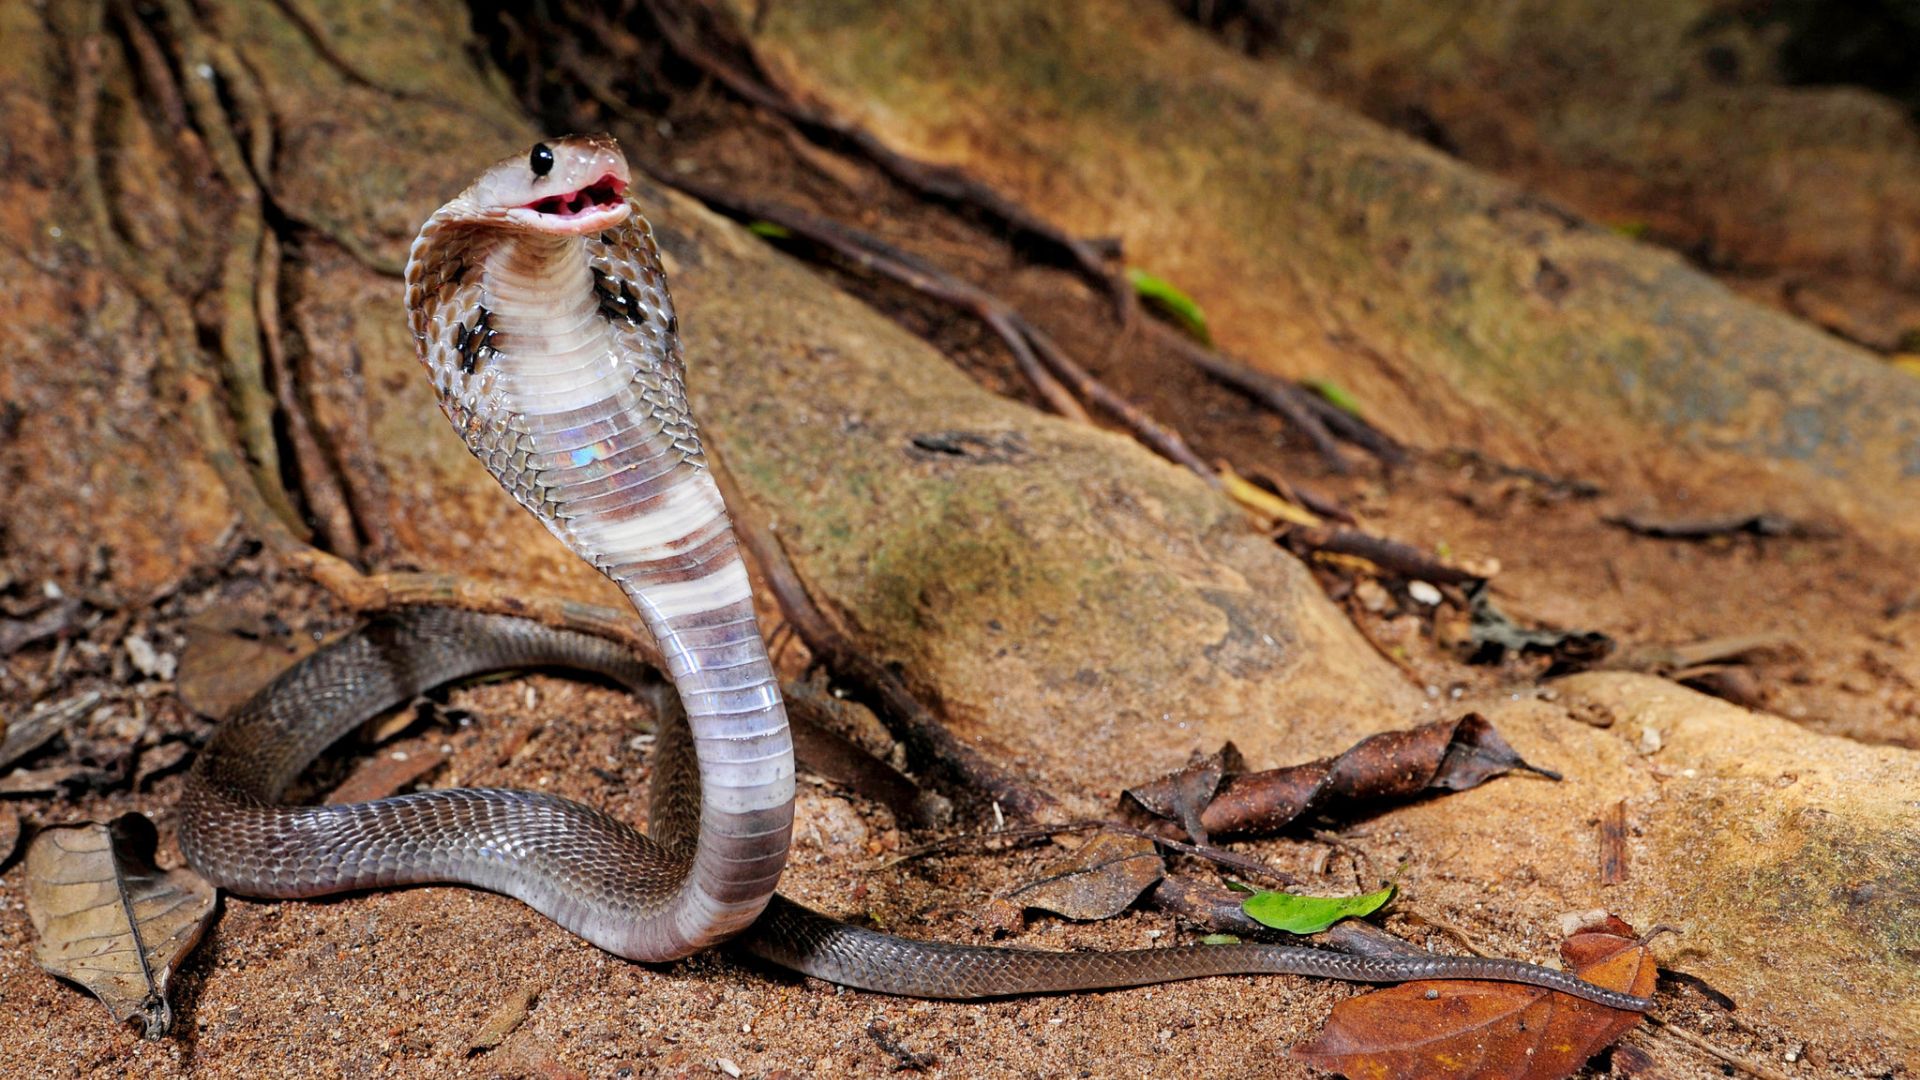 Opened Mouth Cobra On Ground